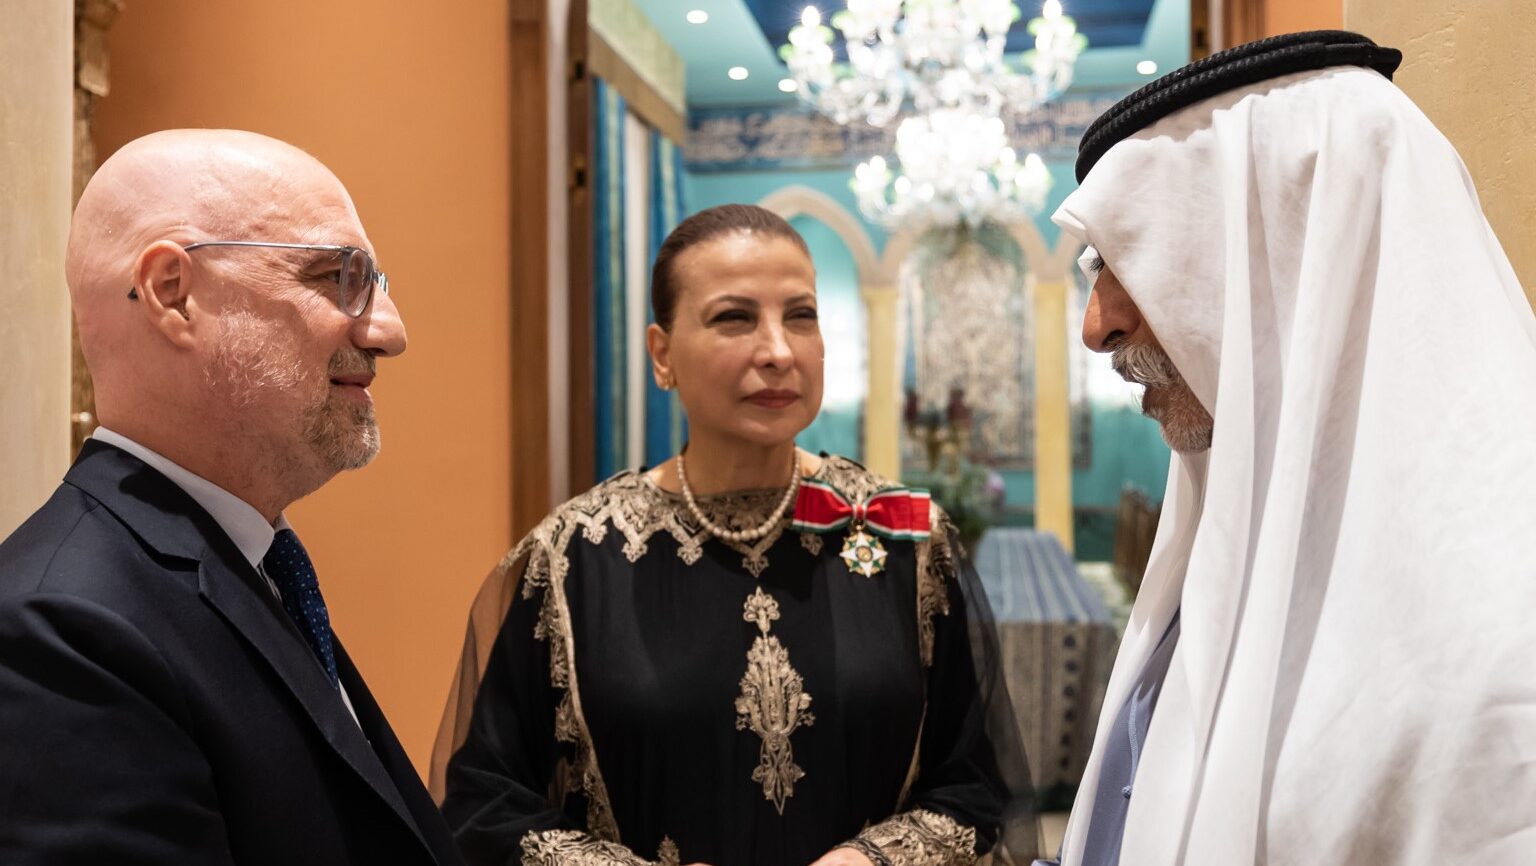 ADMAF Founder H.E Huda Alkhamis Kanoo Receives Order of the Star of Italy